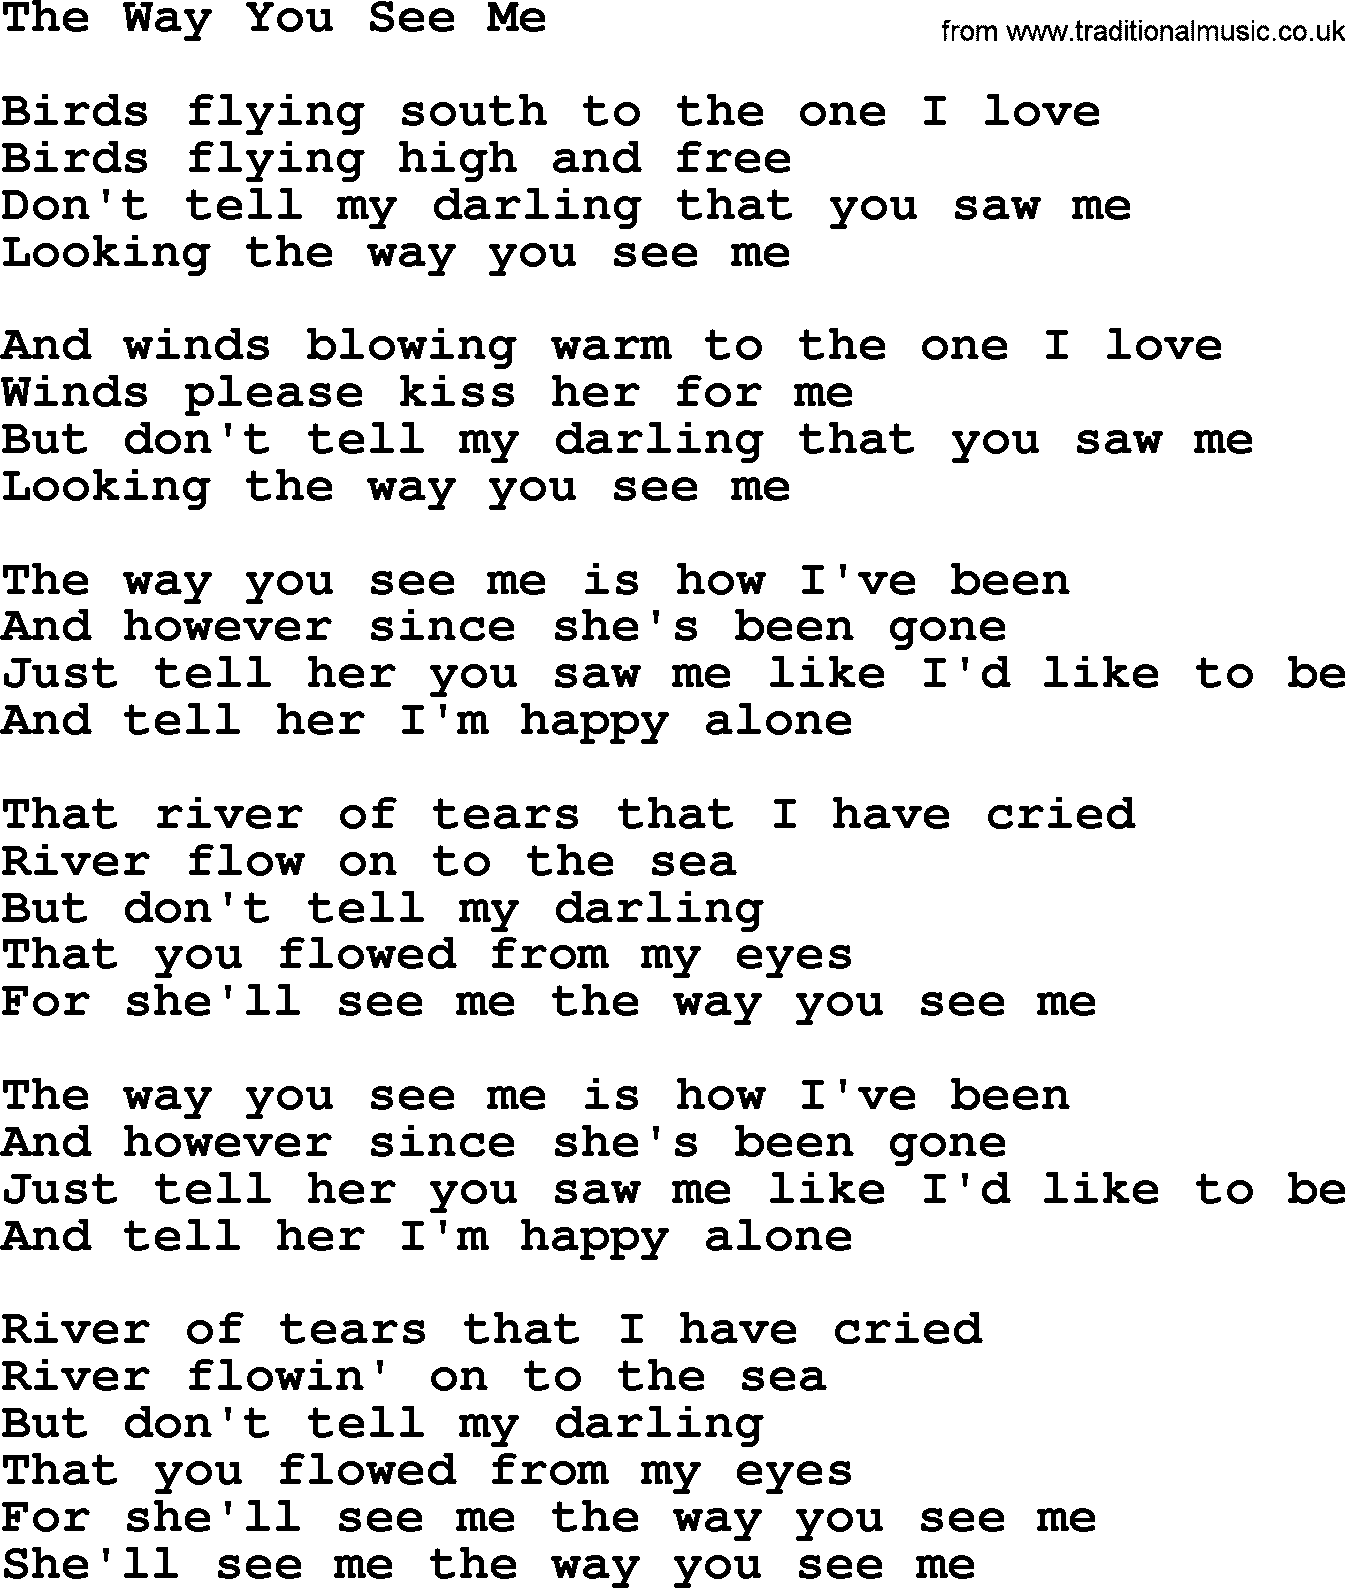 Willie Nelson song: The Way You See Me lyrics